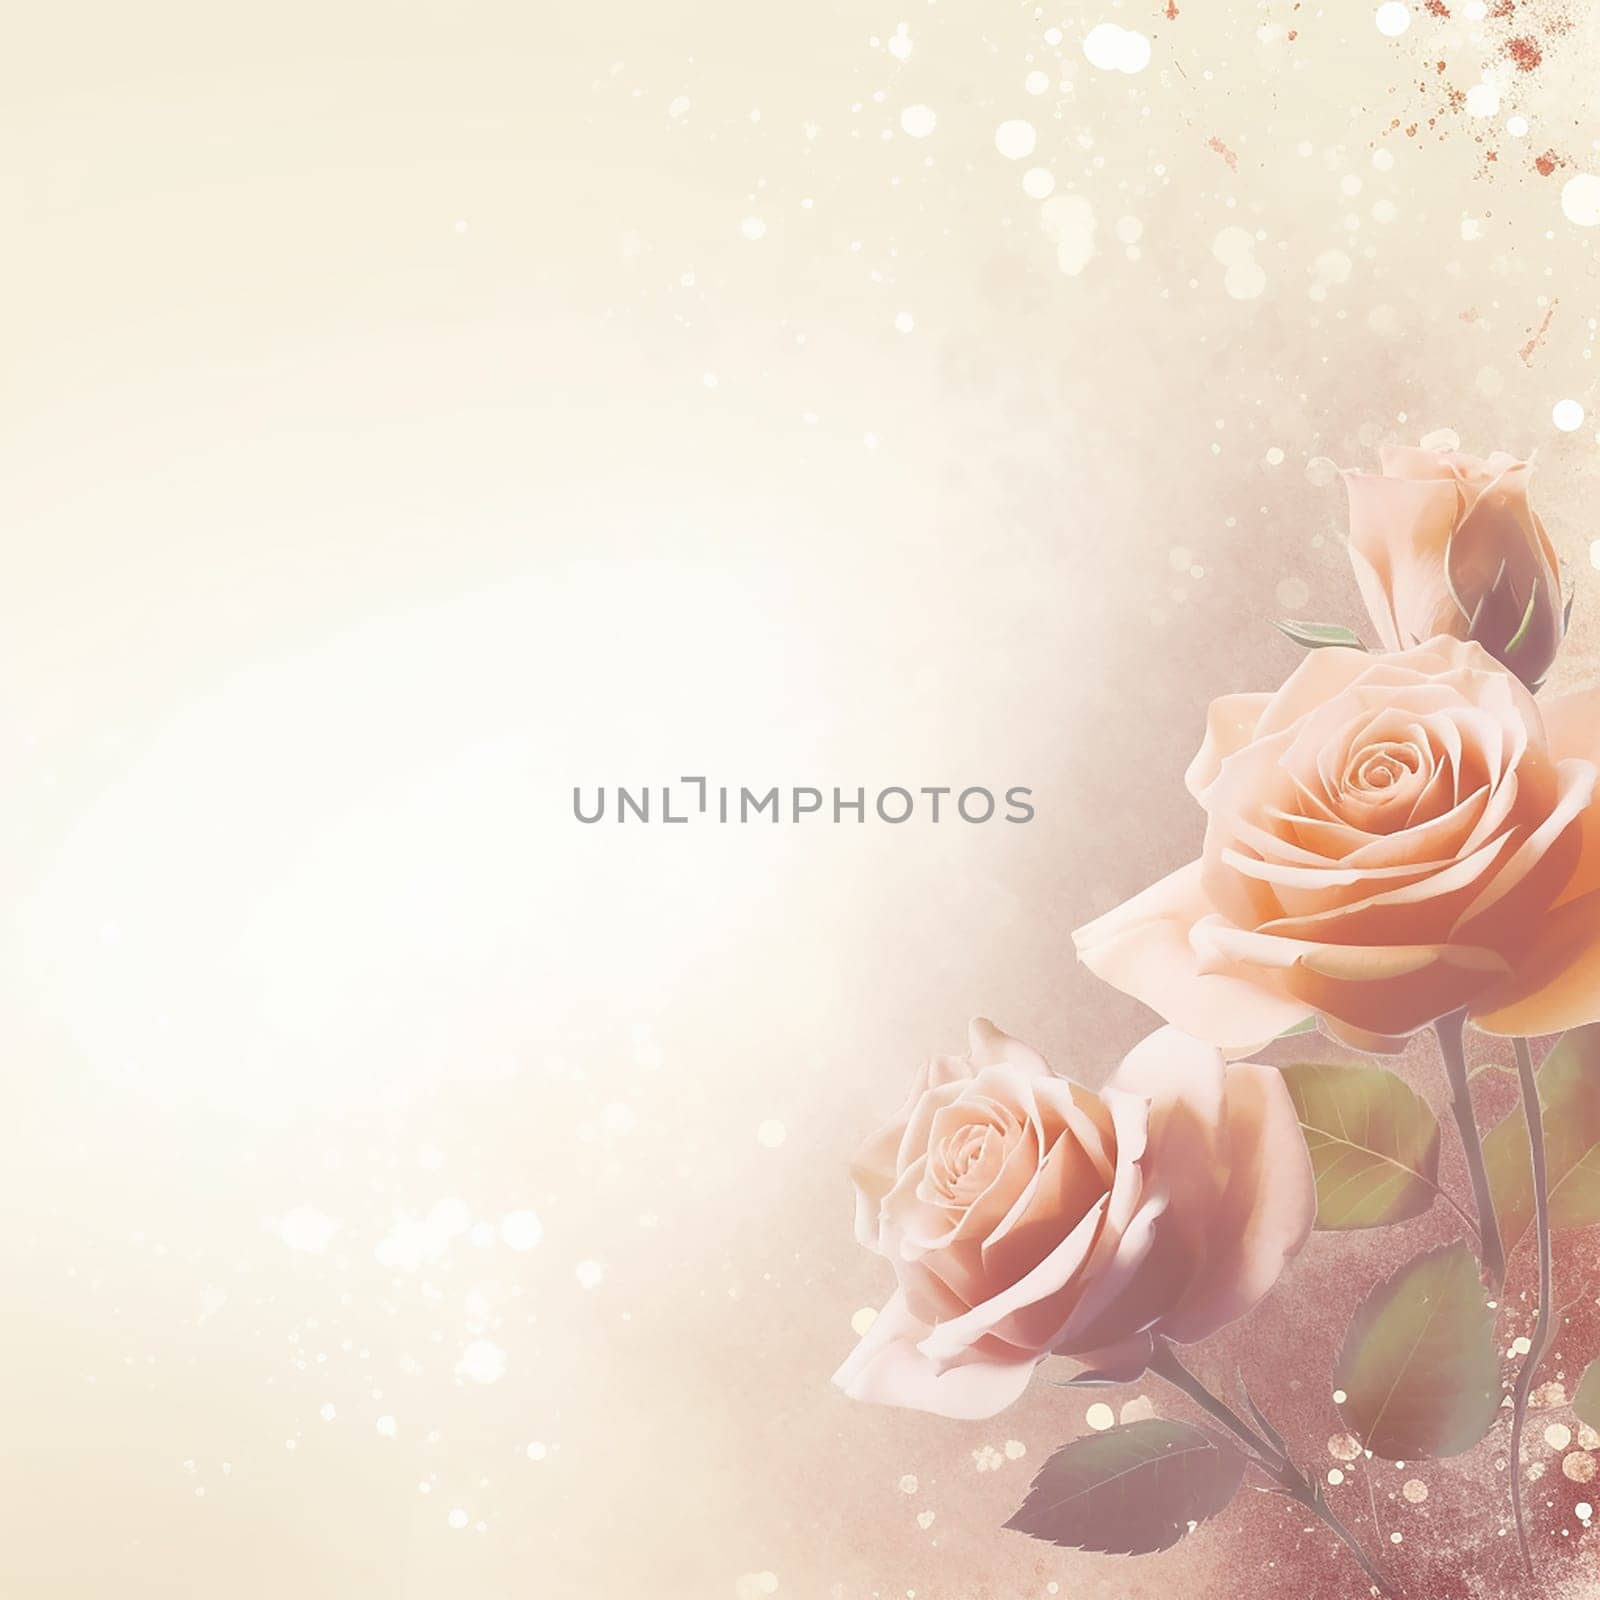 Elegant pale roses with sparkles on a soft cream background.